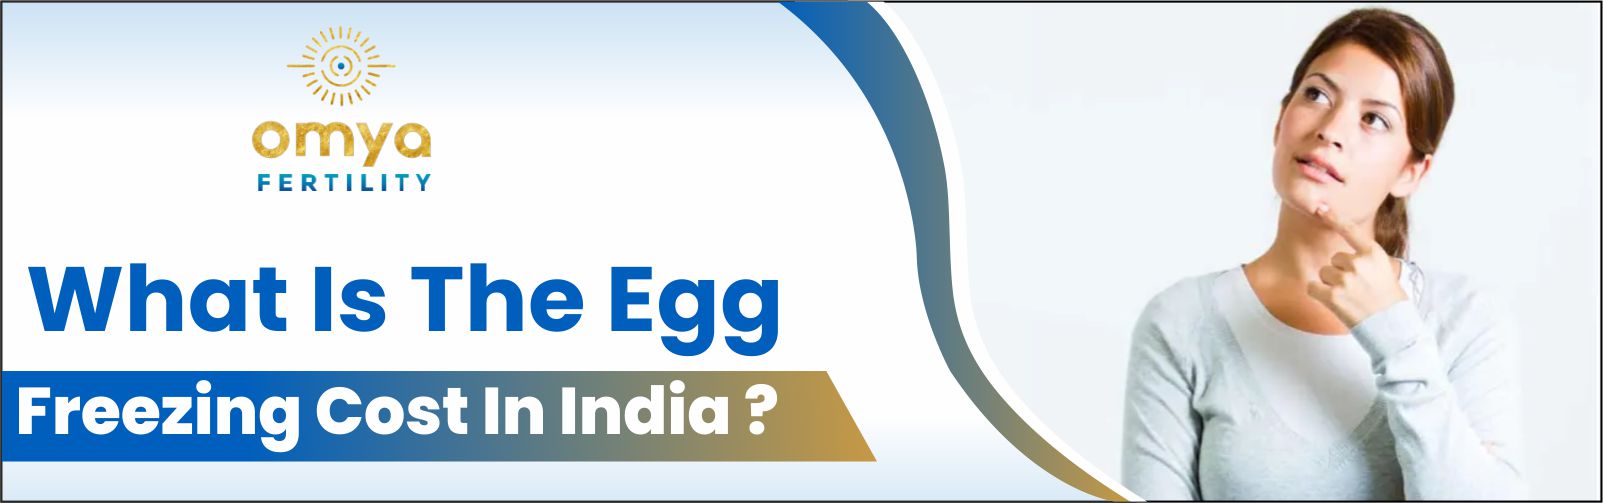 egg-freezing-cost-in-india